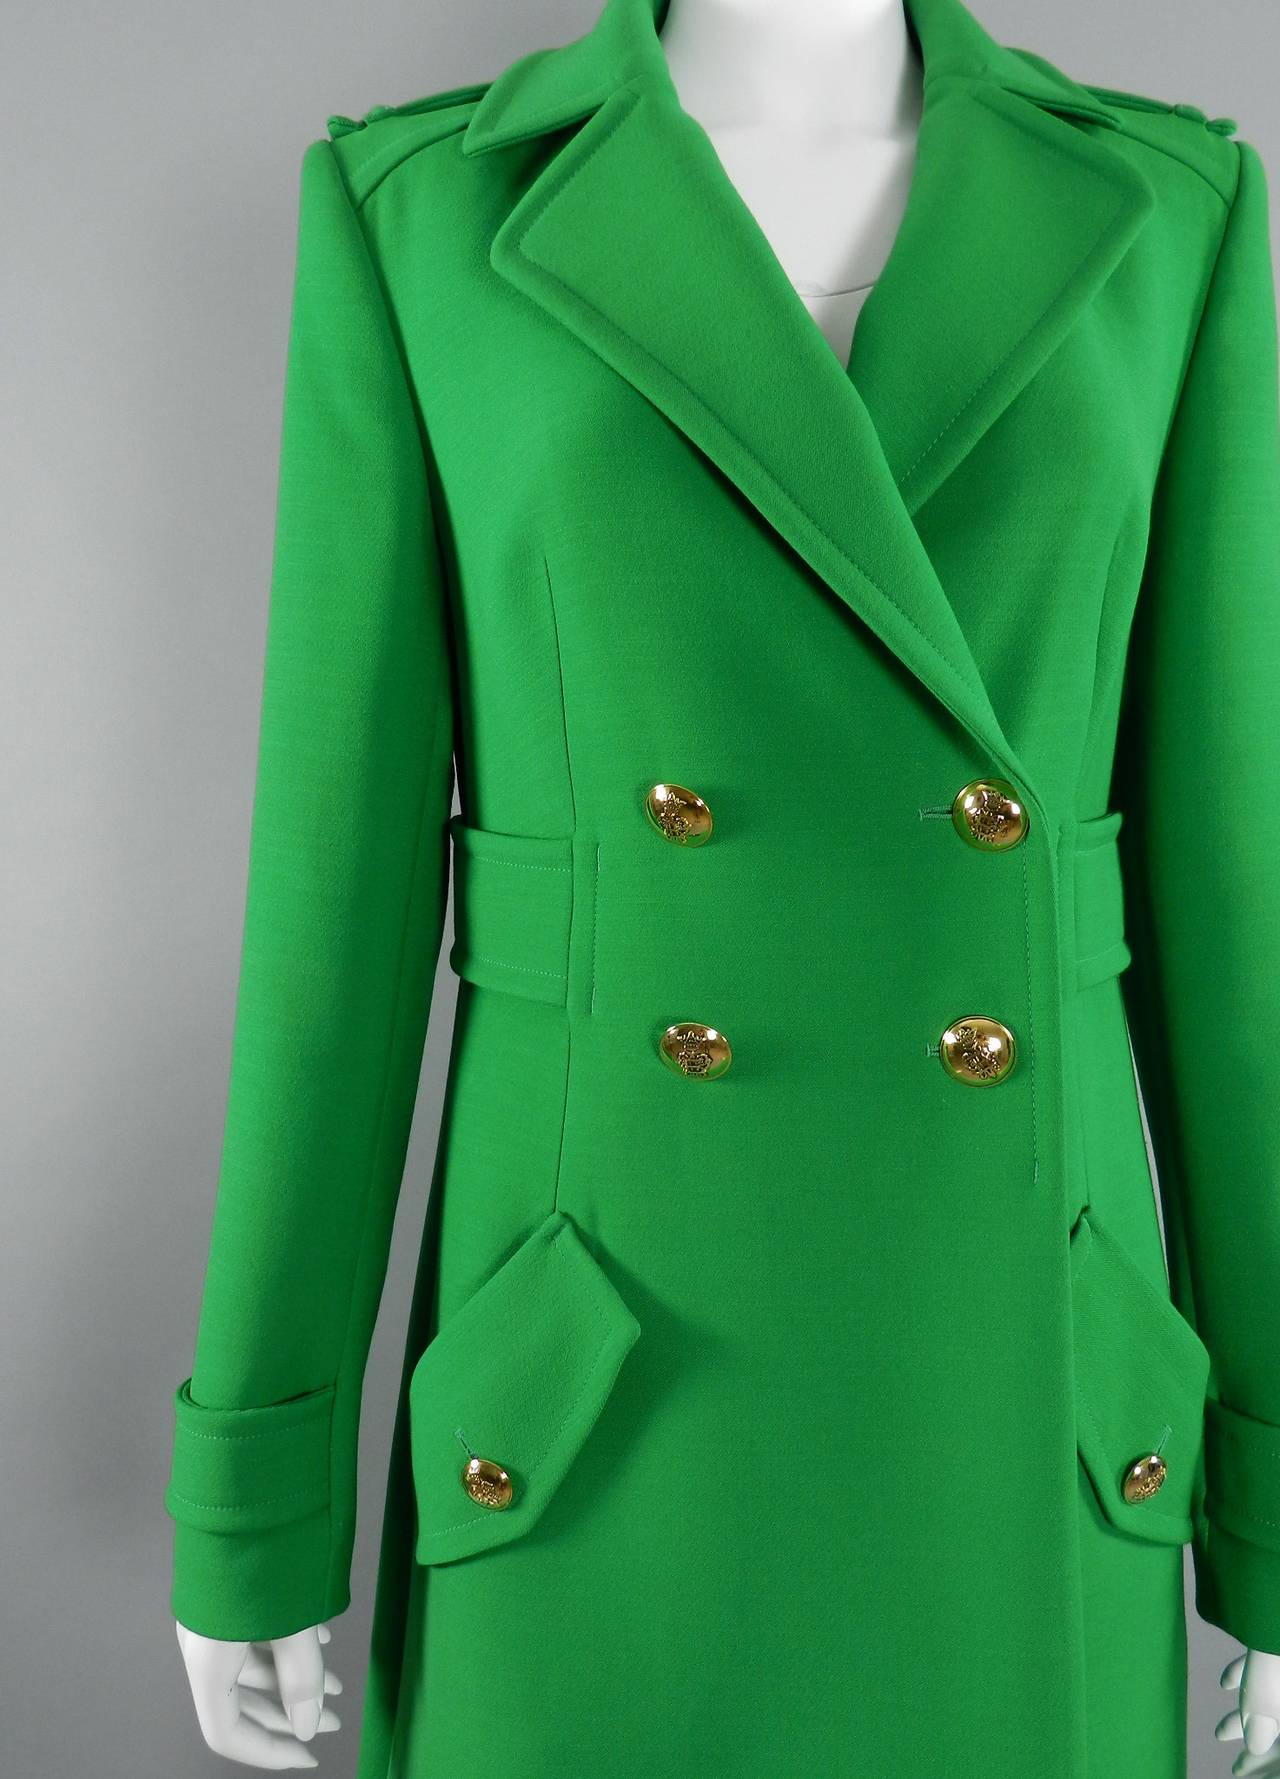 Women's Emilio Pucci Green Wool Coat with Gold Buttons